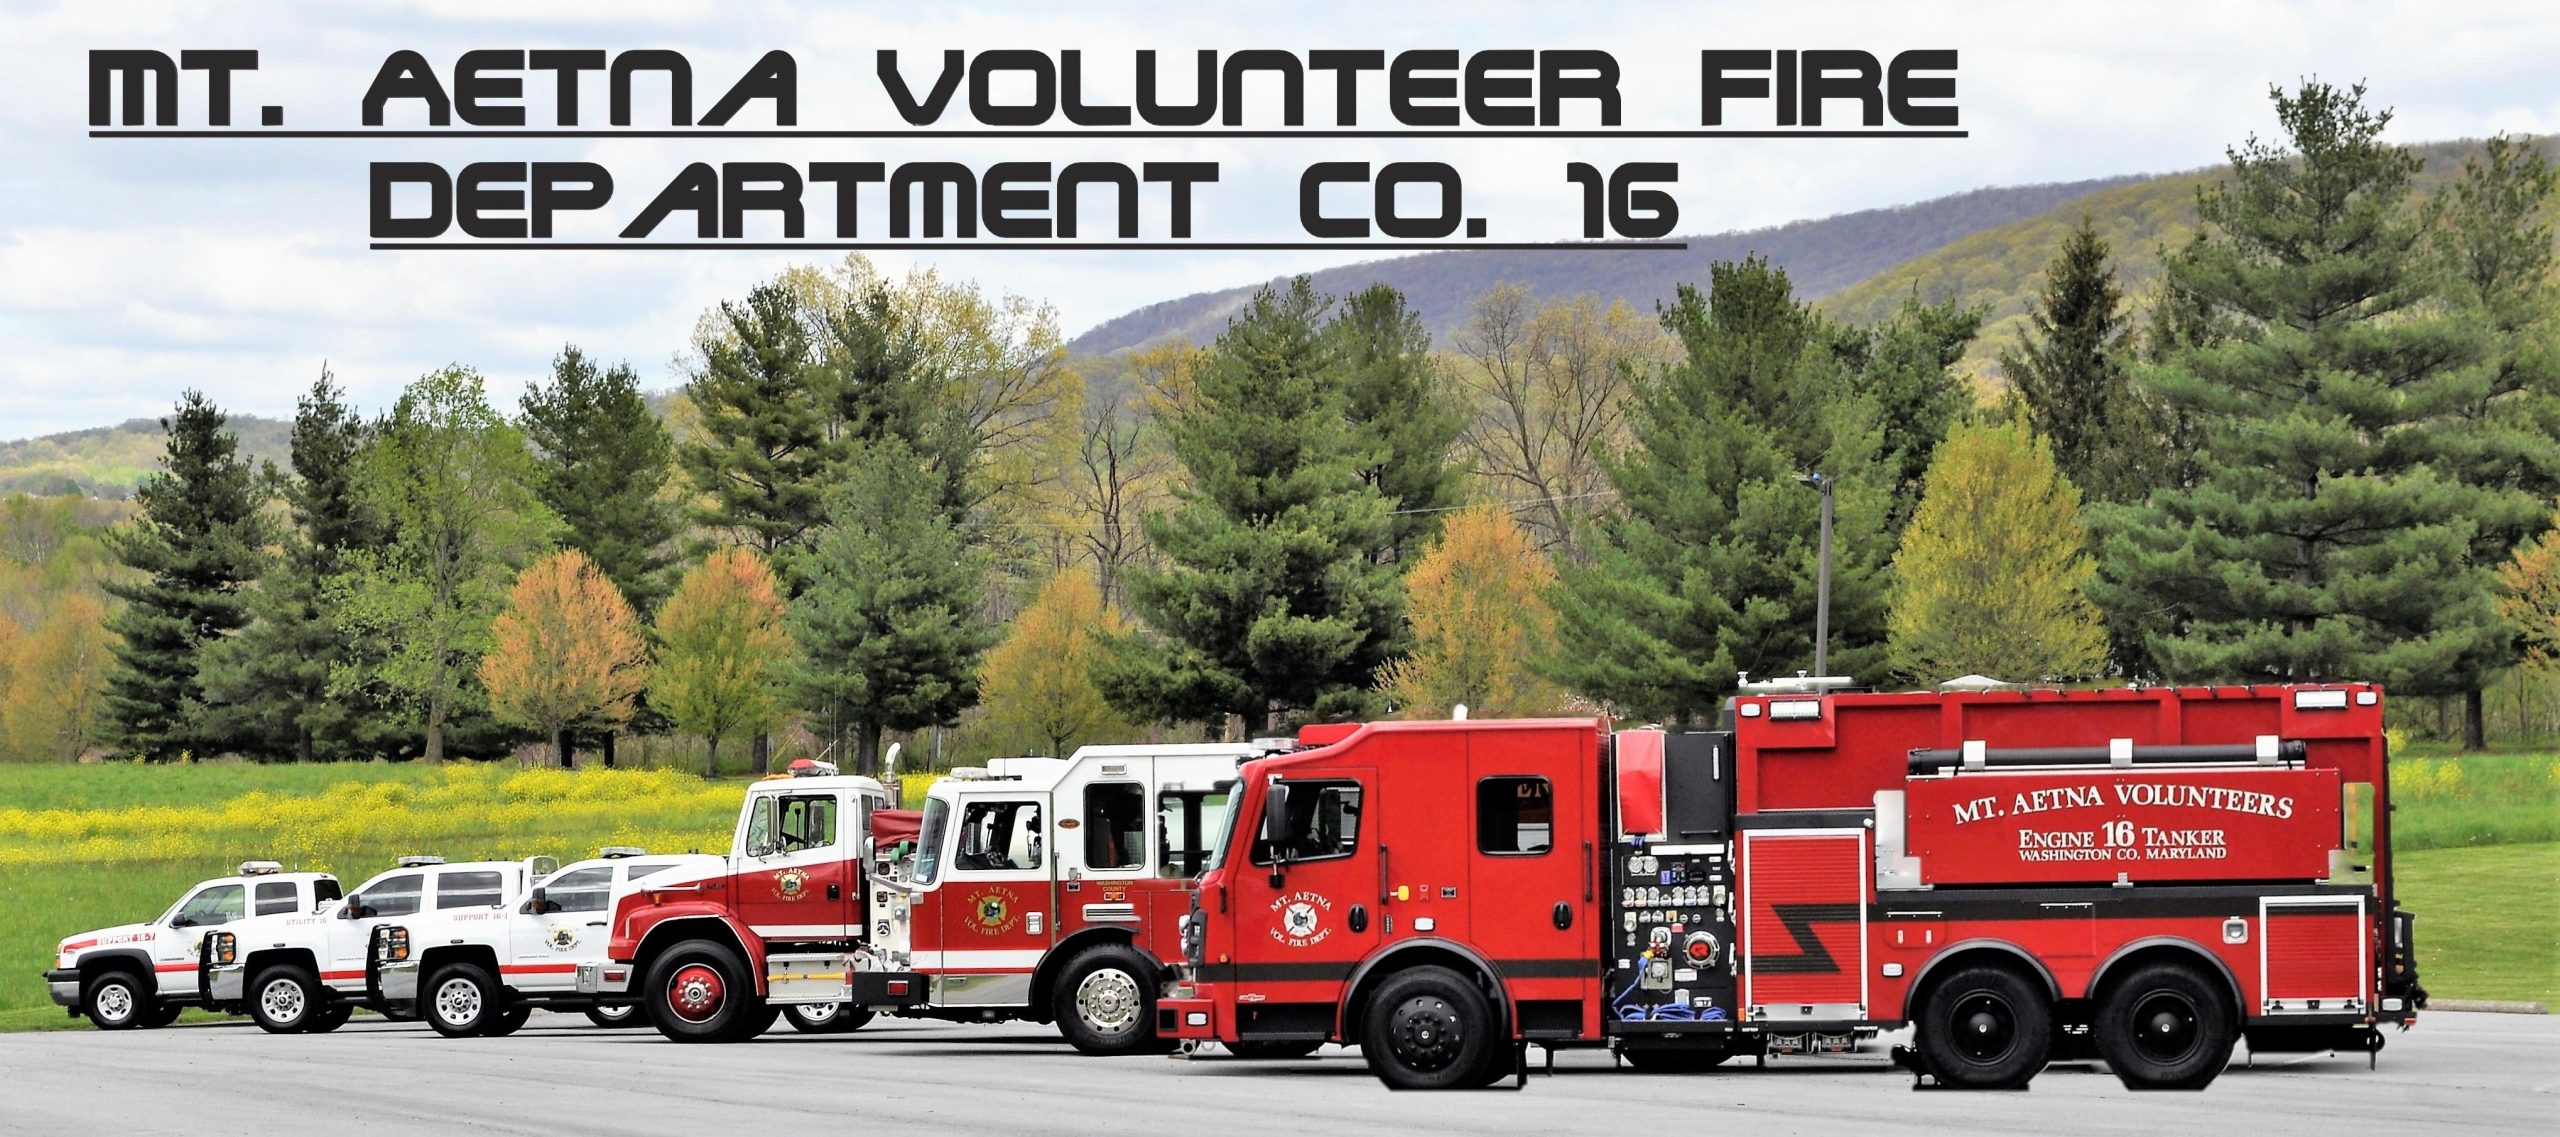 MT. AETNA VOLUNTEER FIRE DEPARTMENT 2nd ANNUAL GOLF CLASSIC